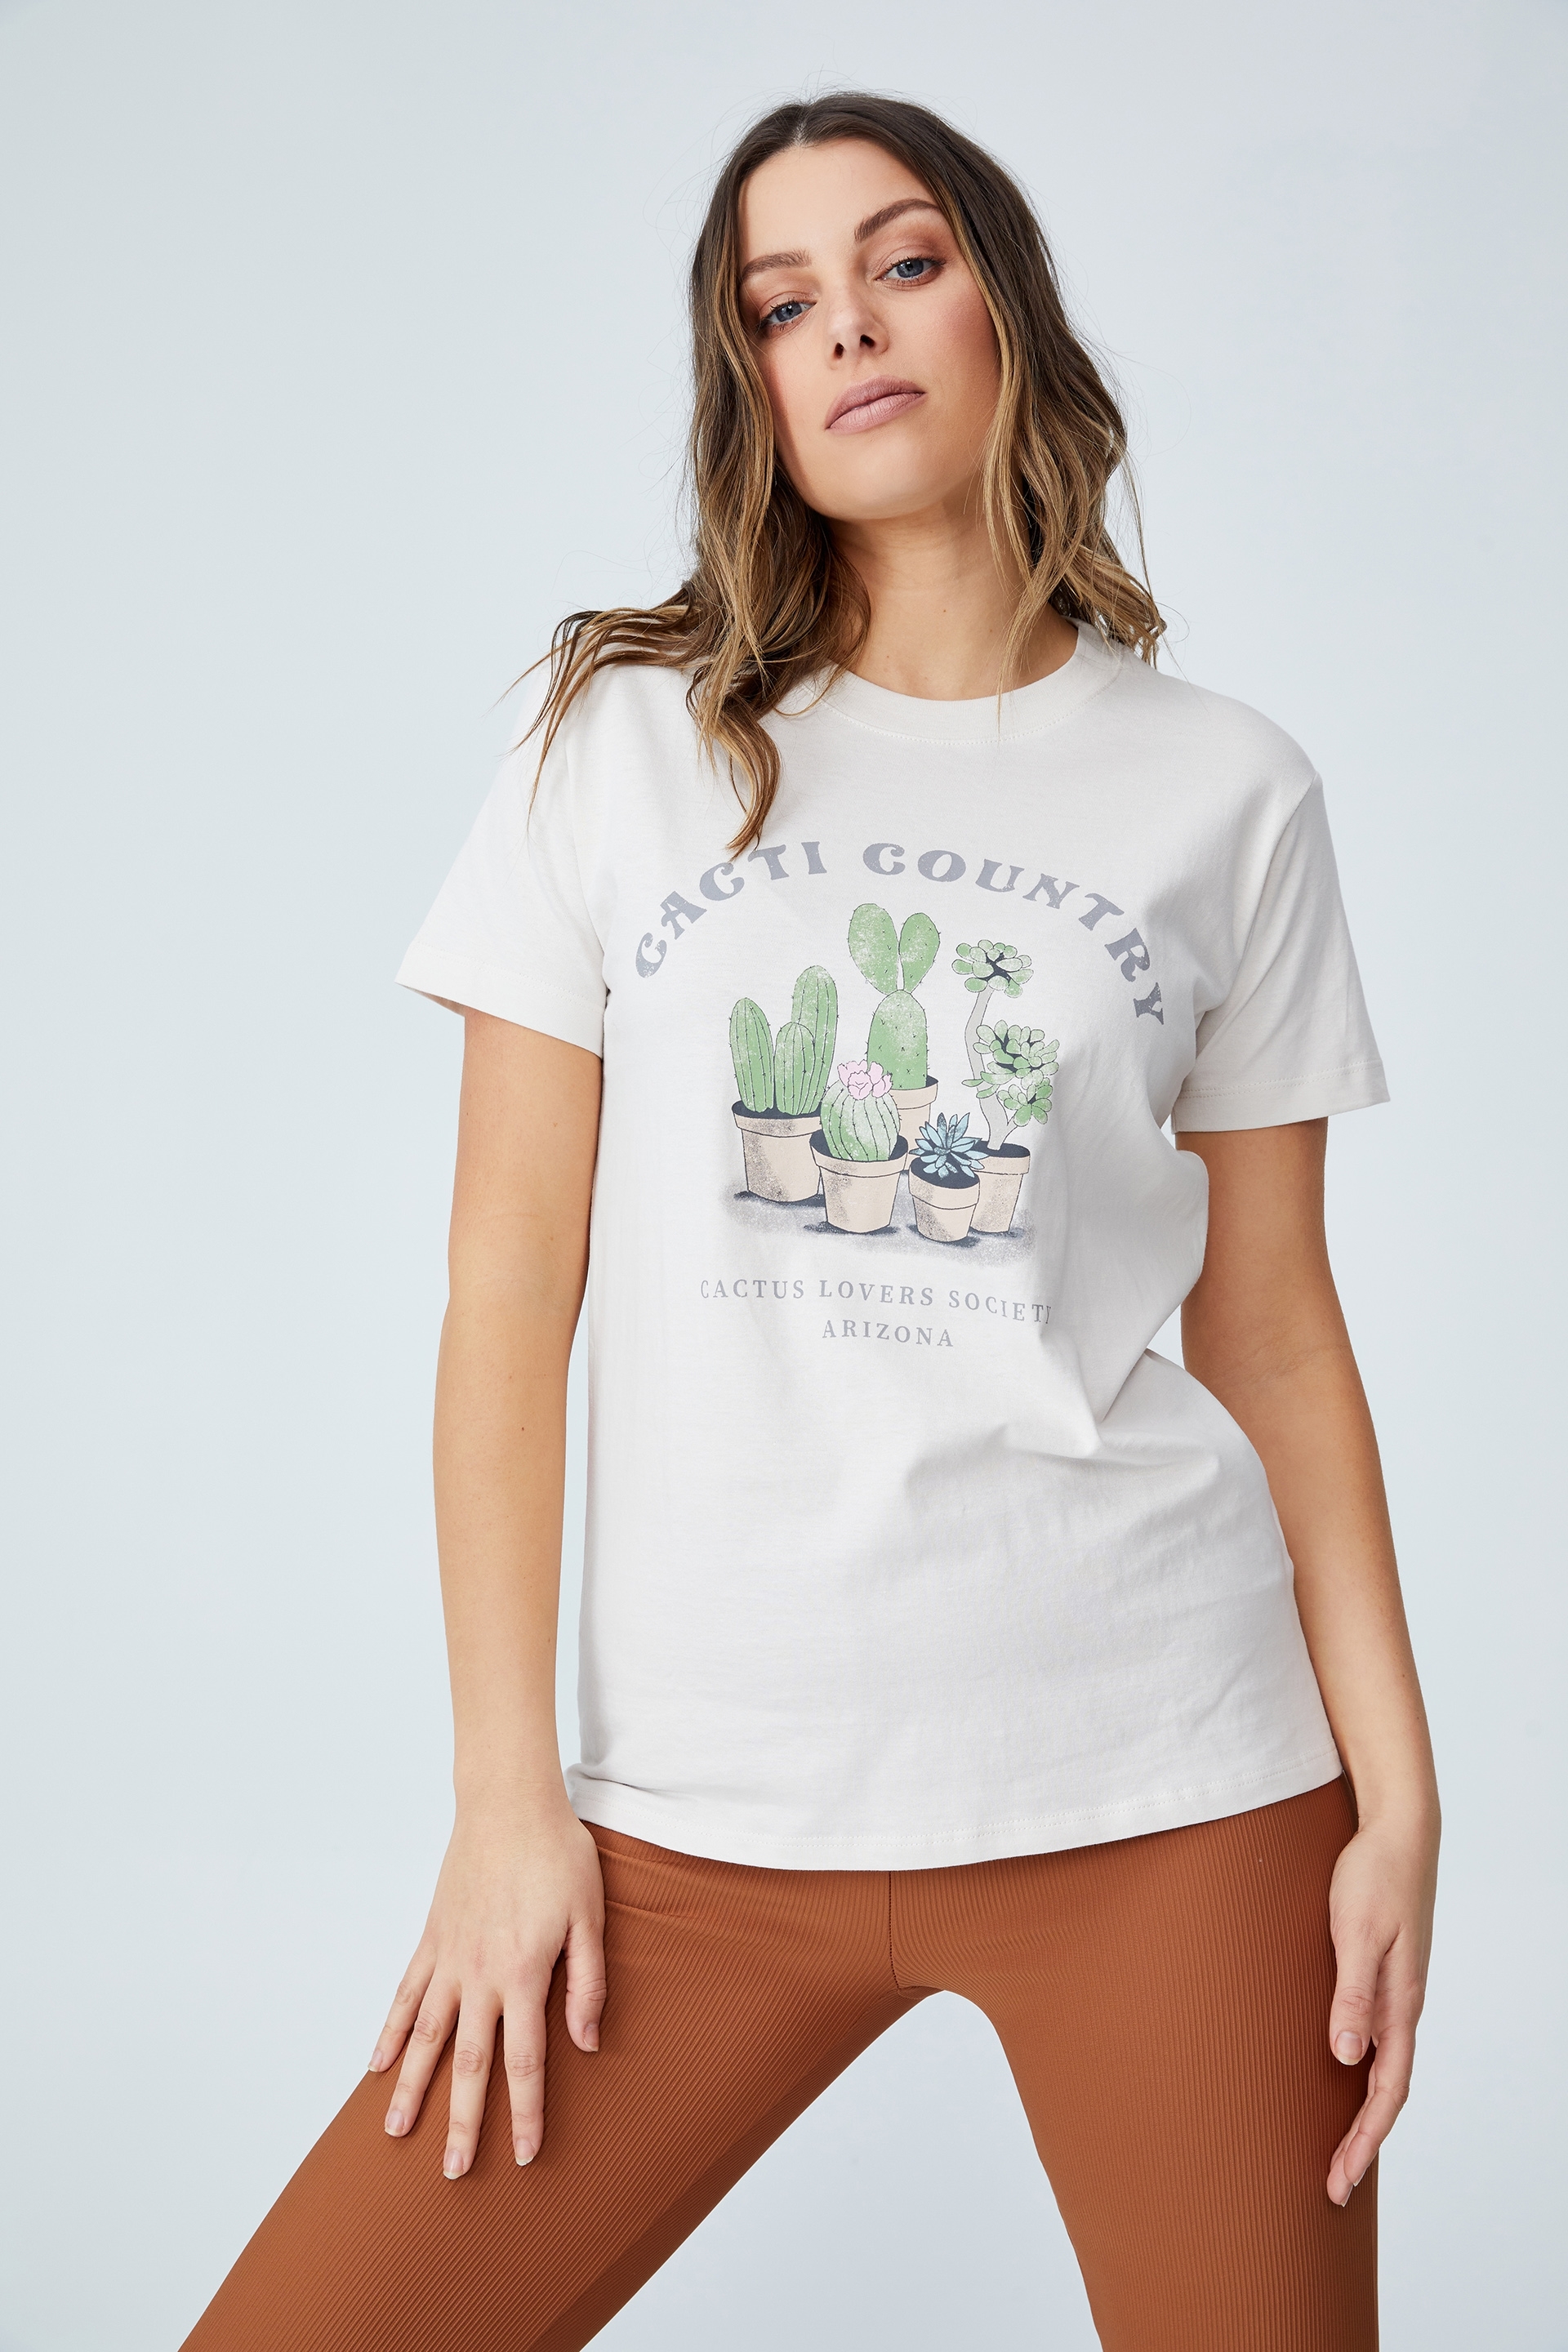 Cotton On Women - Classic Organic Cotton Graphic T Shirt - Cacti country/white sand